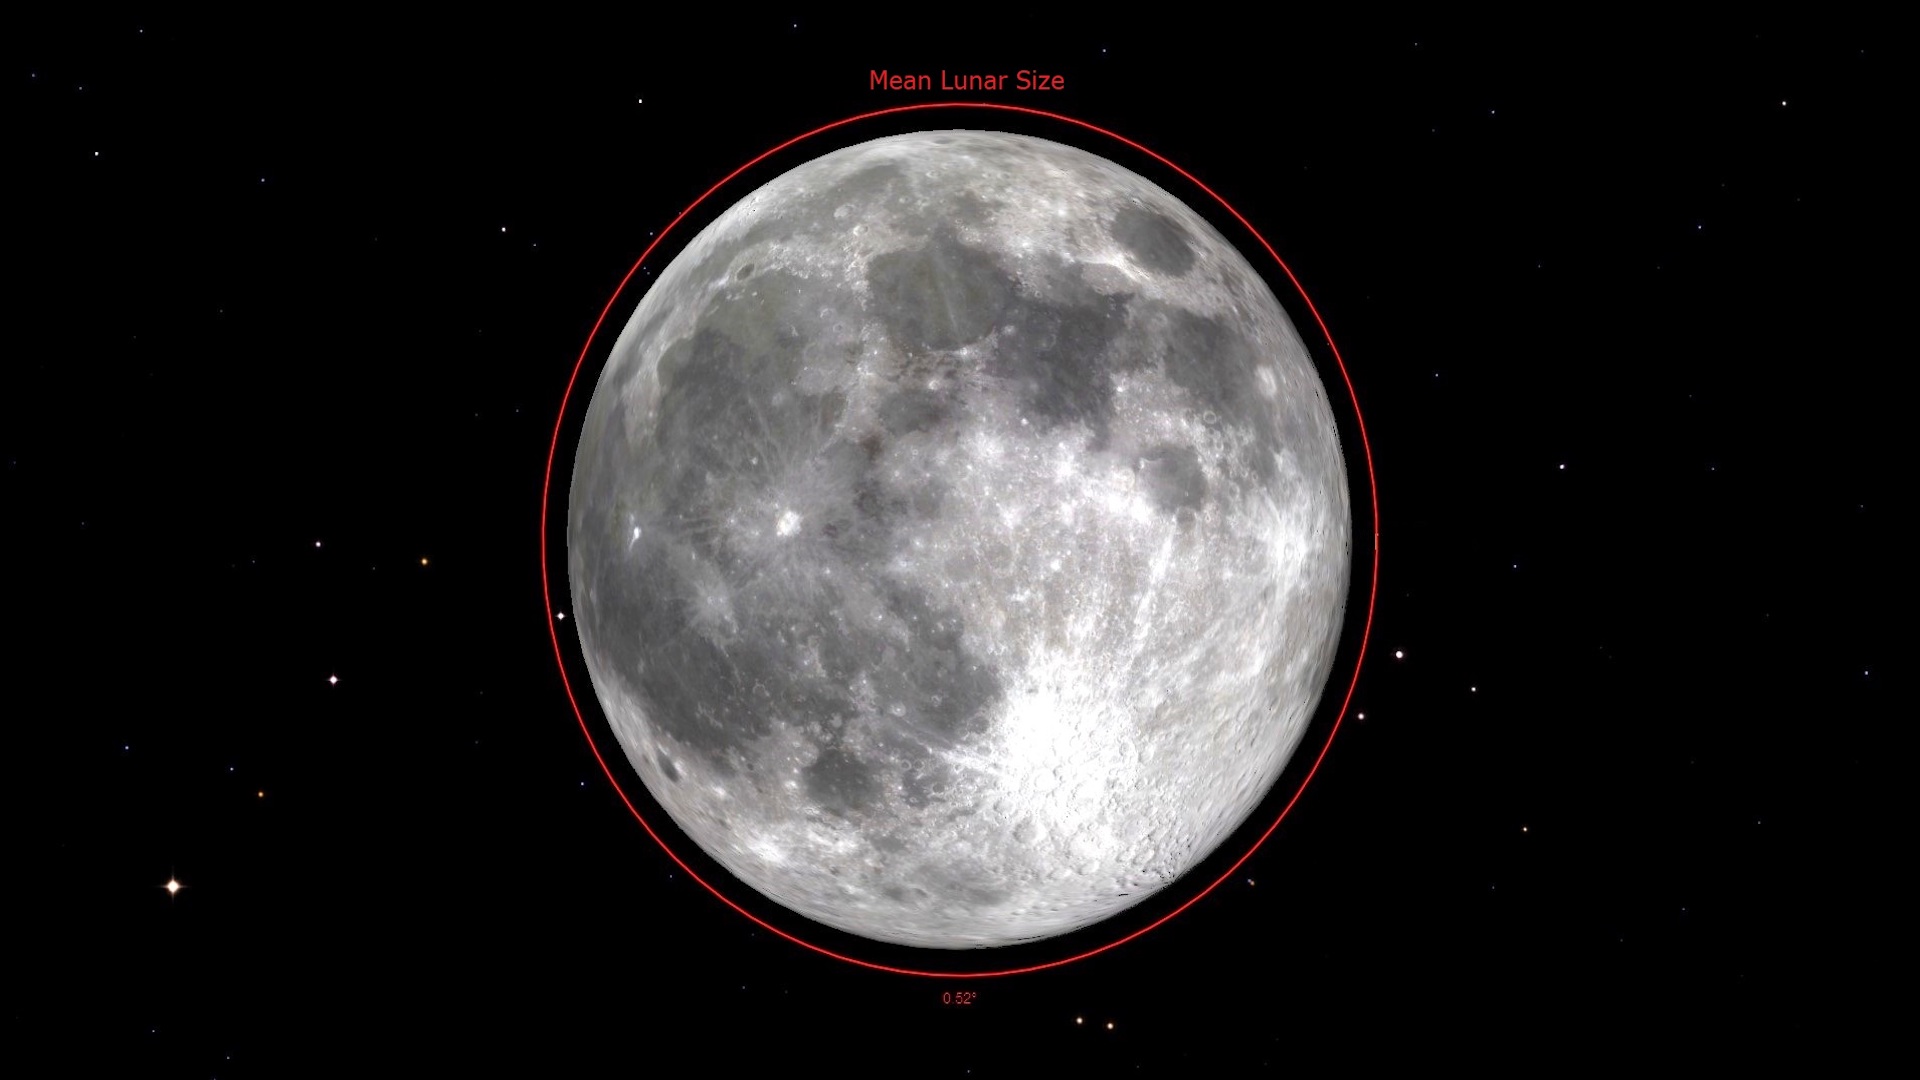 February full moon 2023 The Snow Moon rises with Jupiter, Mars and